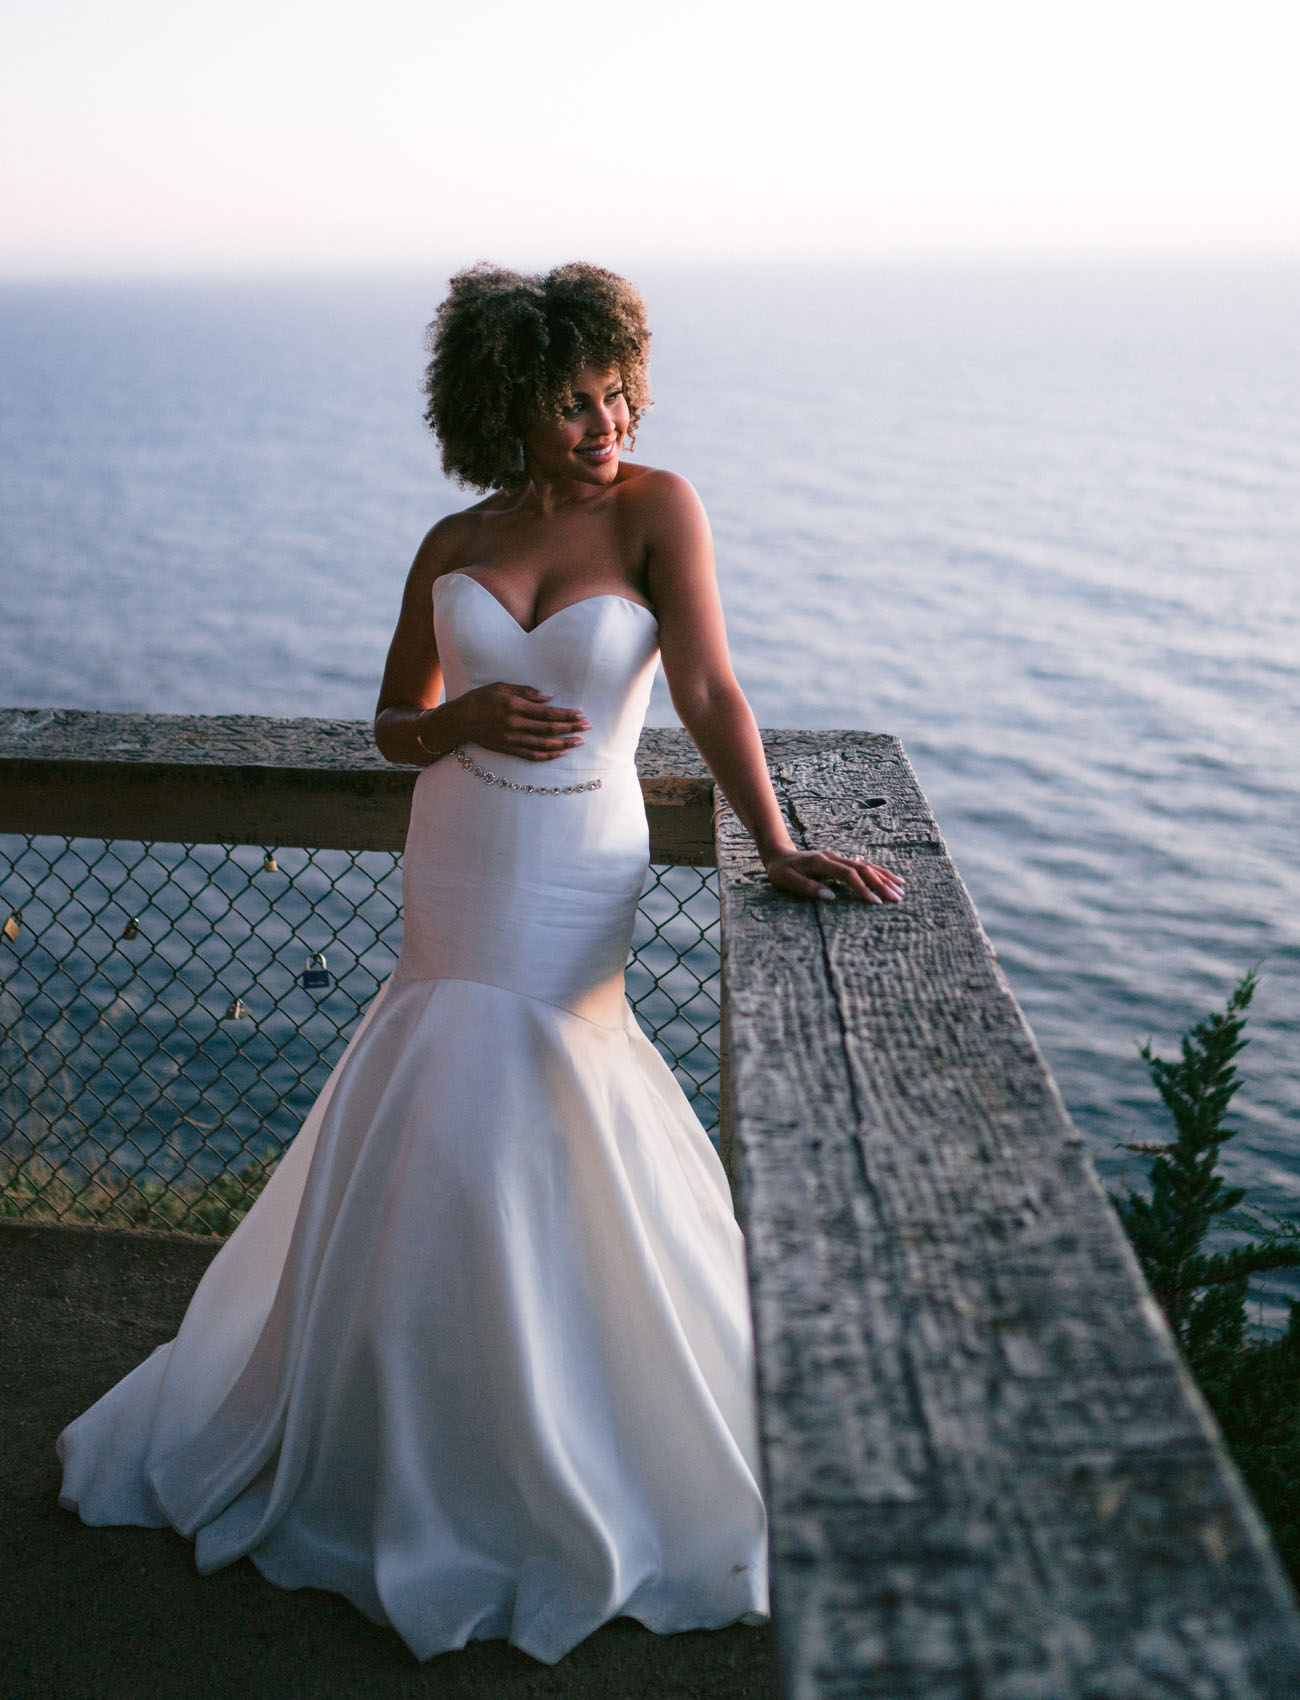 The bride was wearing a strapless mermaid wedding dress with an embellished sash and rocking her Afro hair